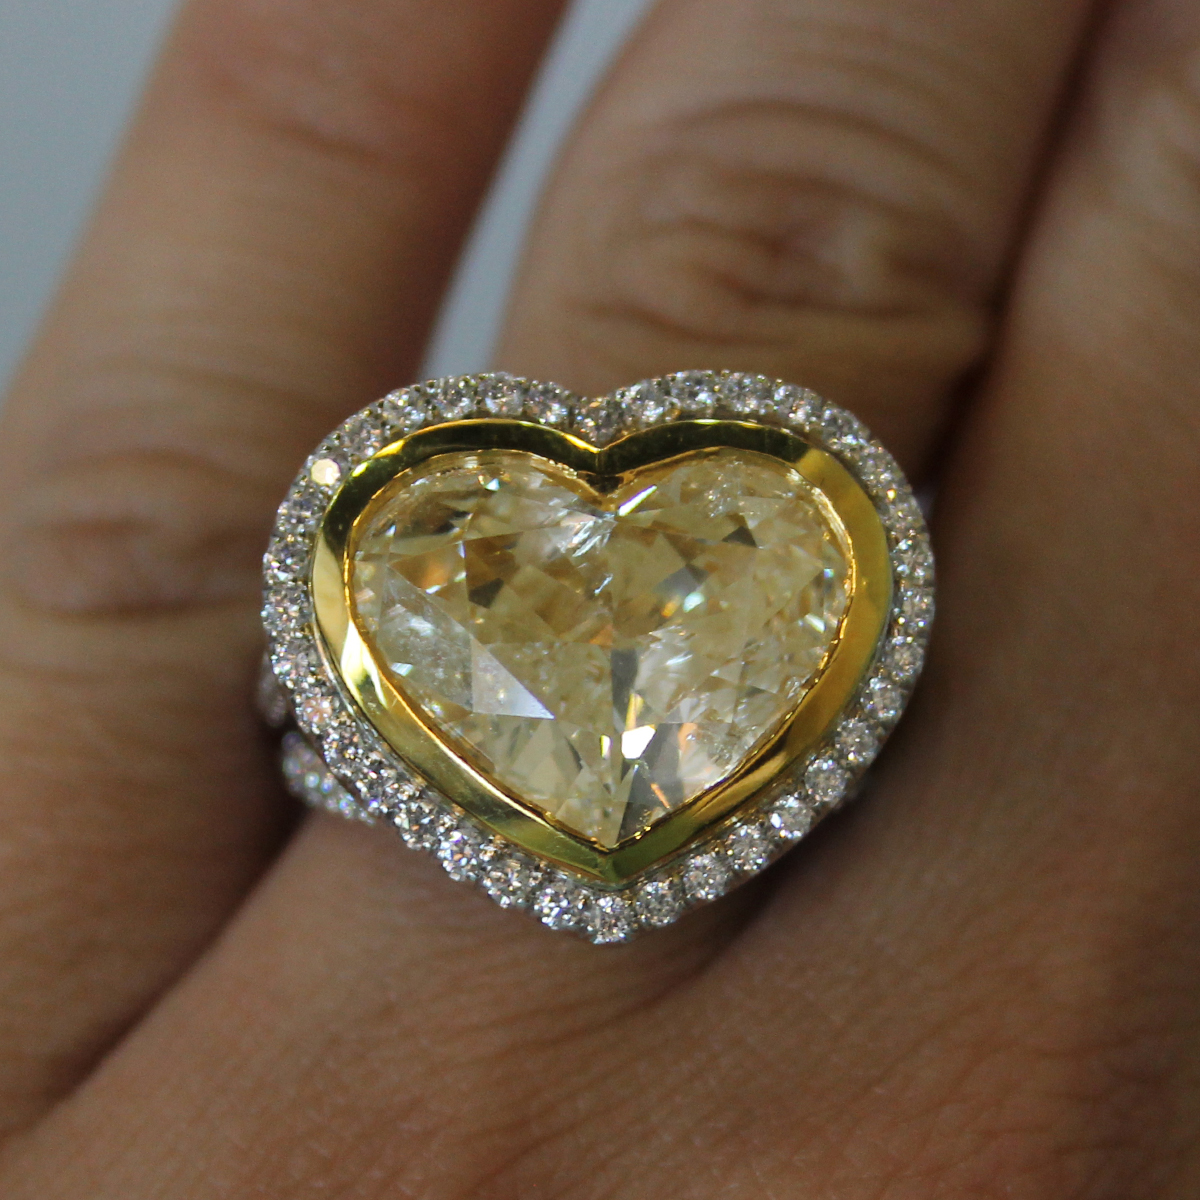 18k Two Tone Gold 8.32ct Heart Shaped Fancy Yellow Diamond Engagement Ring